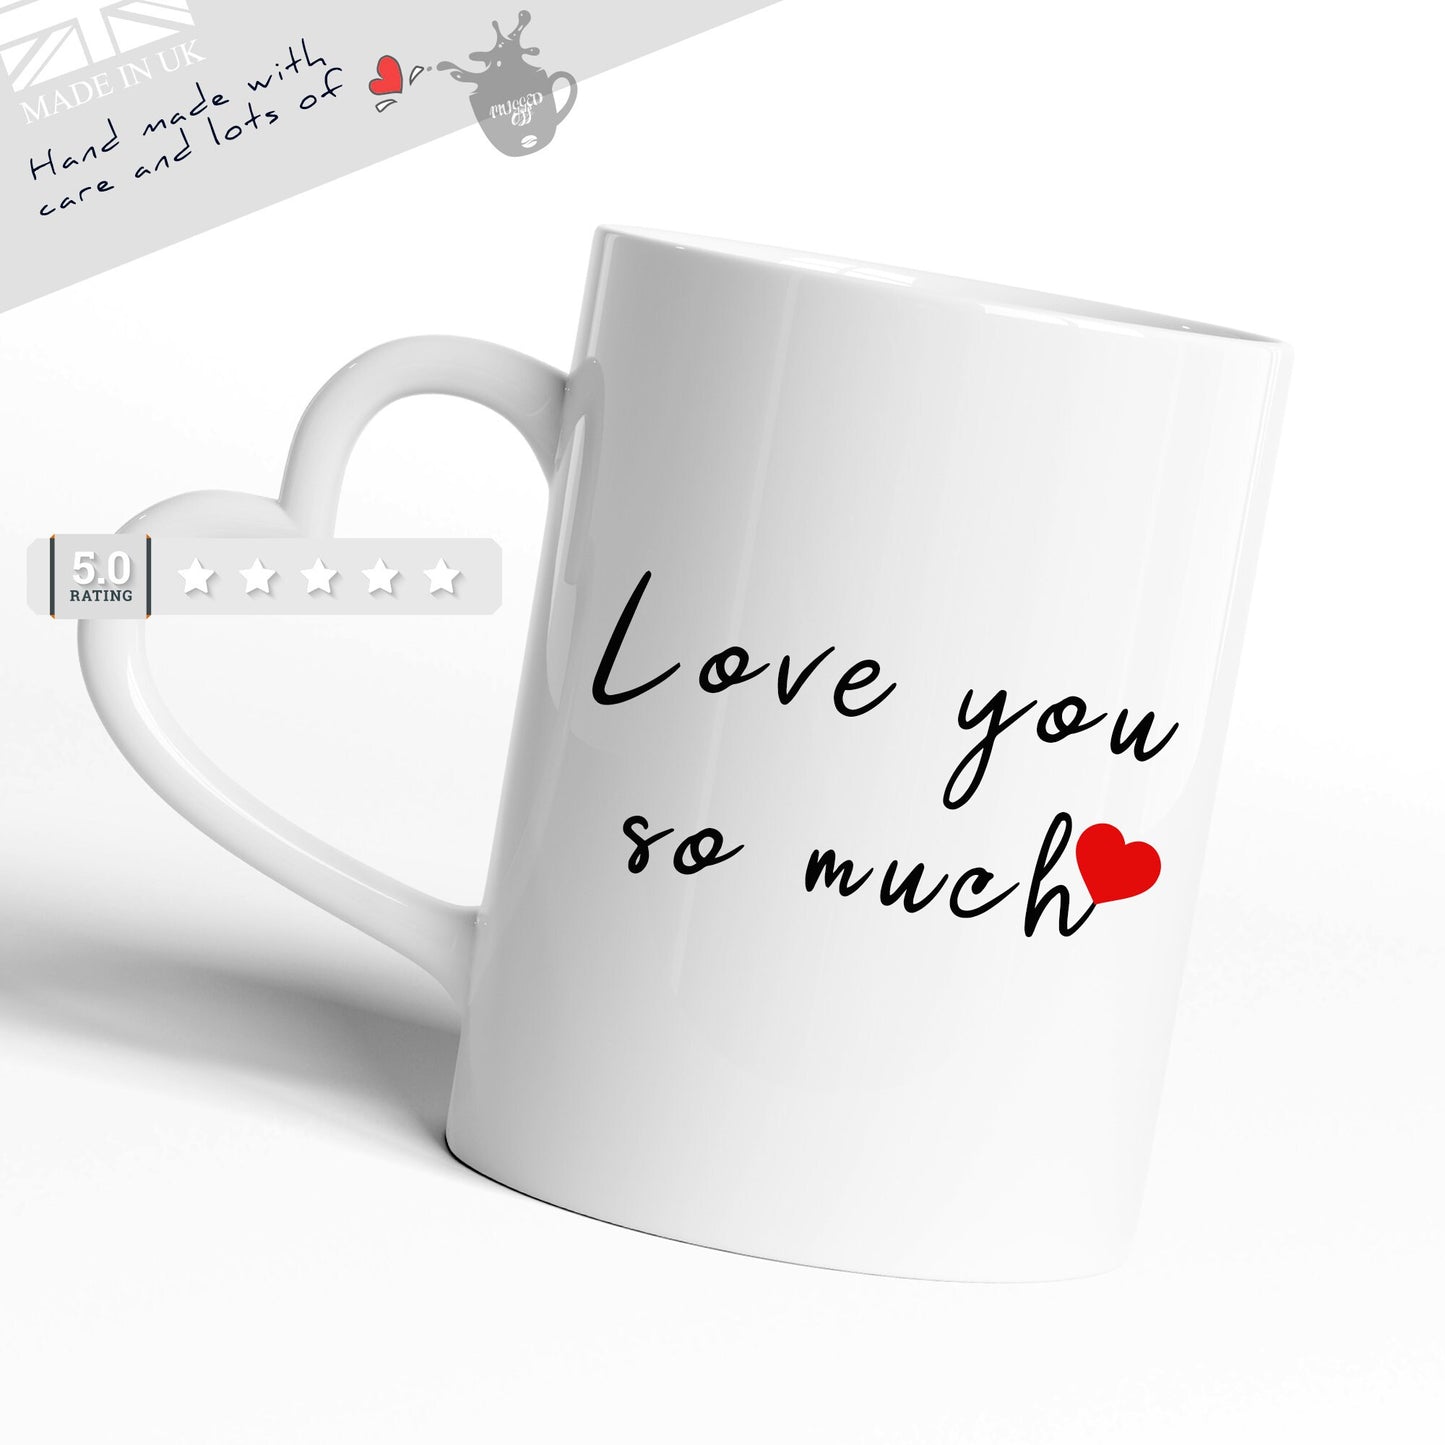 Anniversary Birthday Gift for Men Women Husband Wife Funny Anniversary Romantic Gifts Mug Cups Tea Coffee Mugs - Snoring - Love You So Much - valentine's day gift